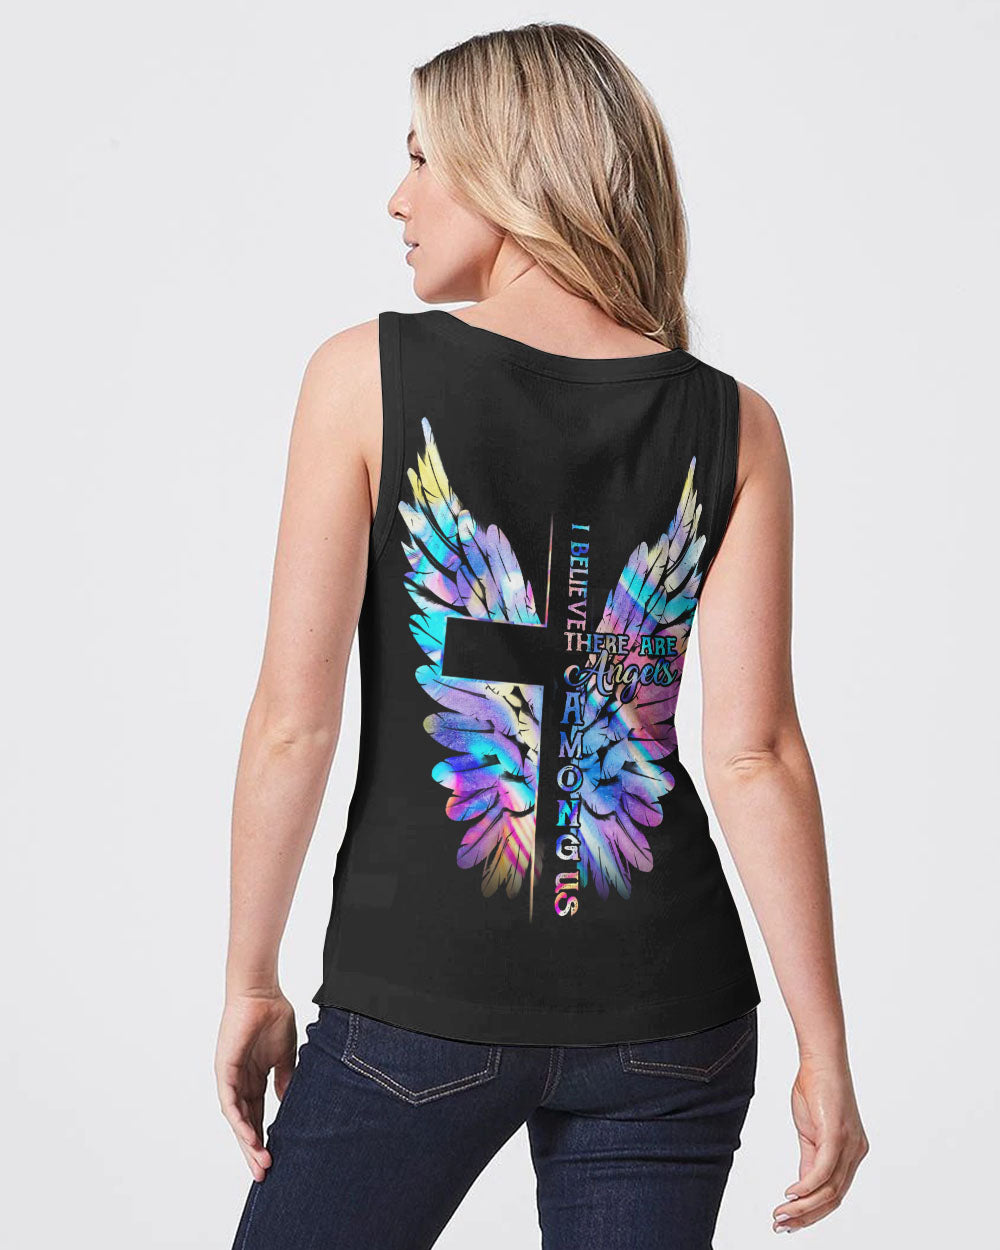 I Believe There Are Angels Among Us Wings Cross Women's Christian Tanks